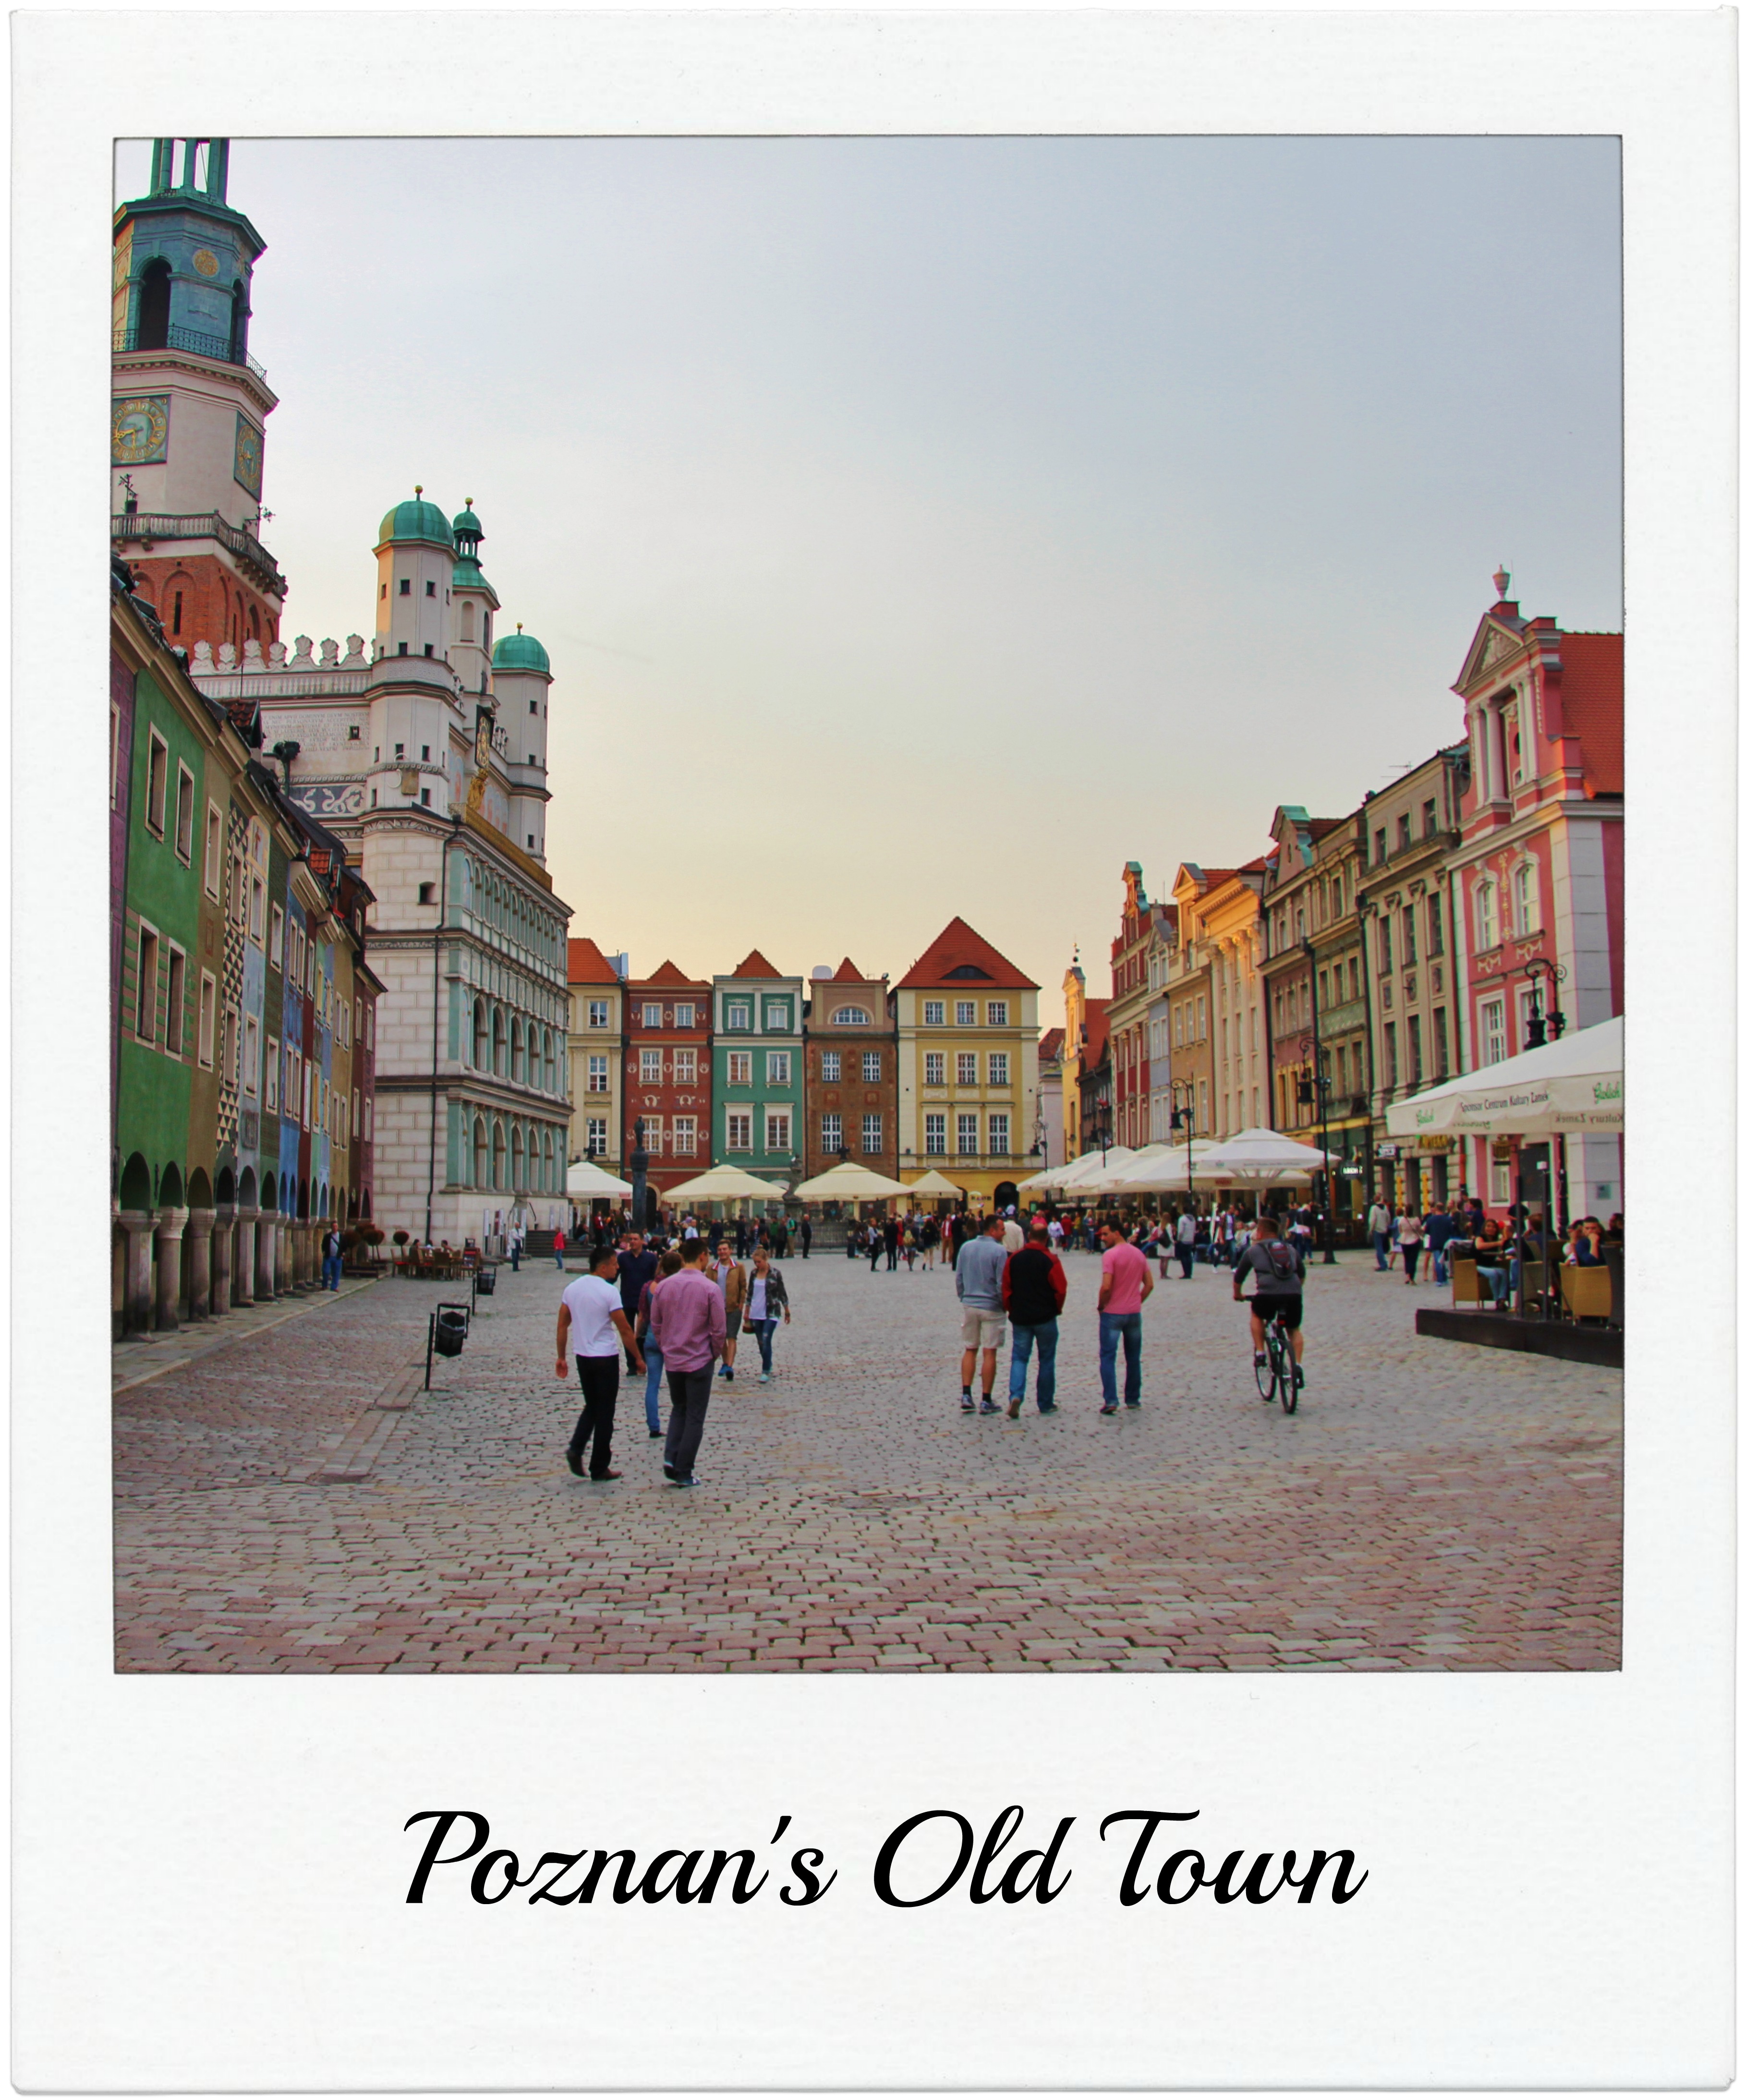 The Old Town of Poznan